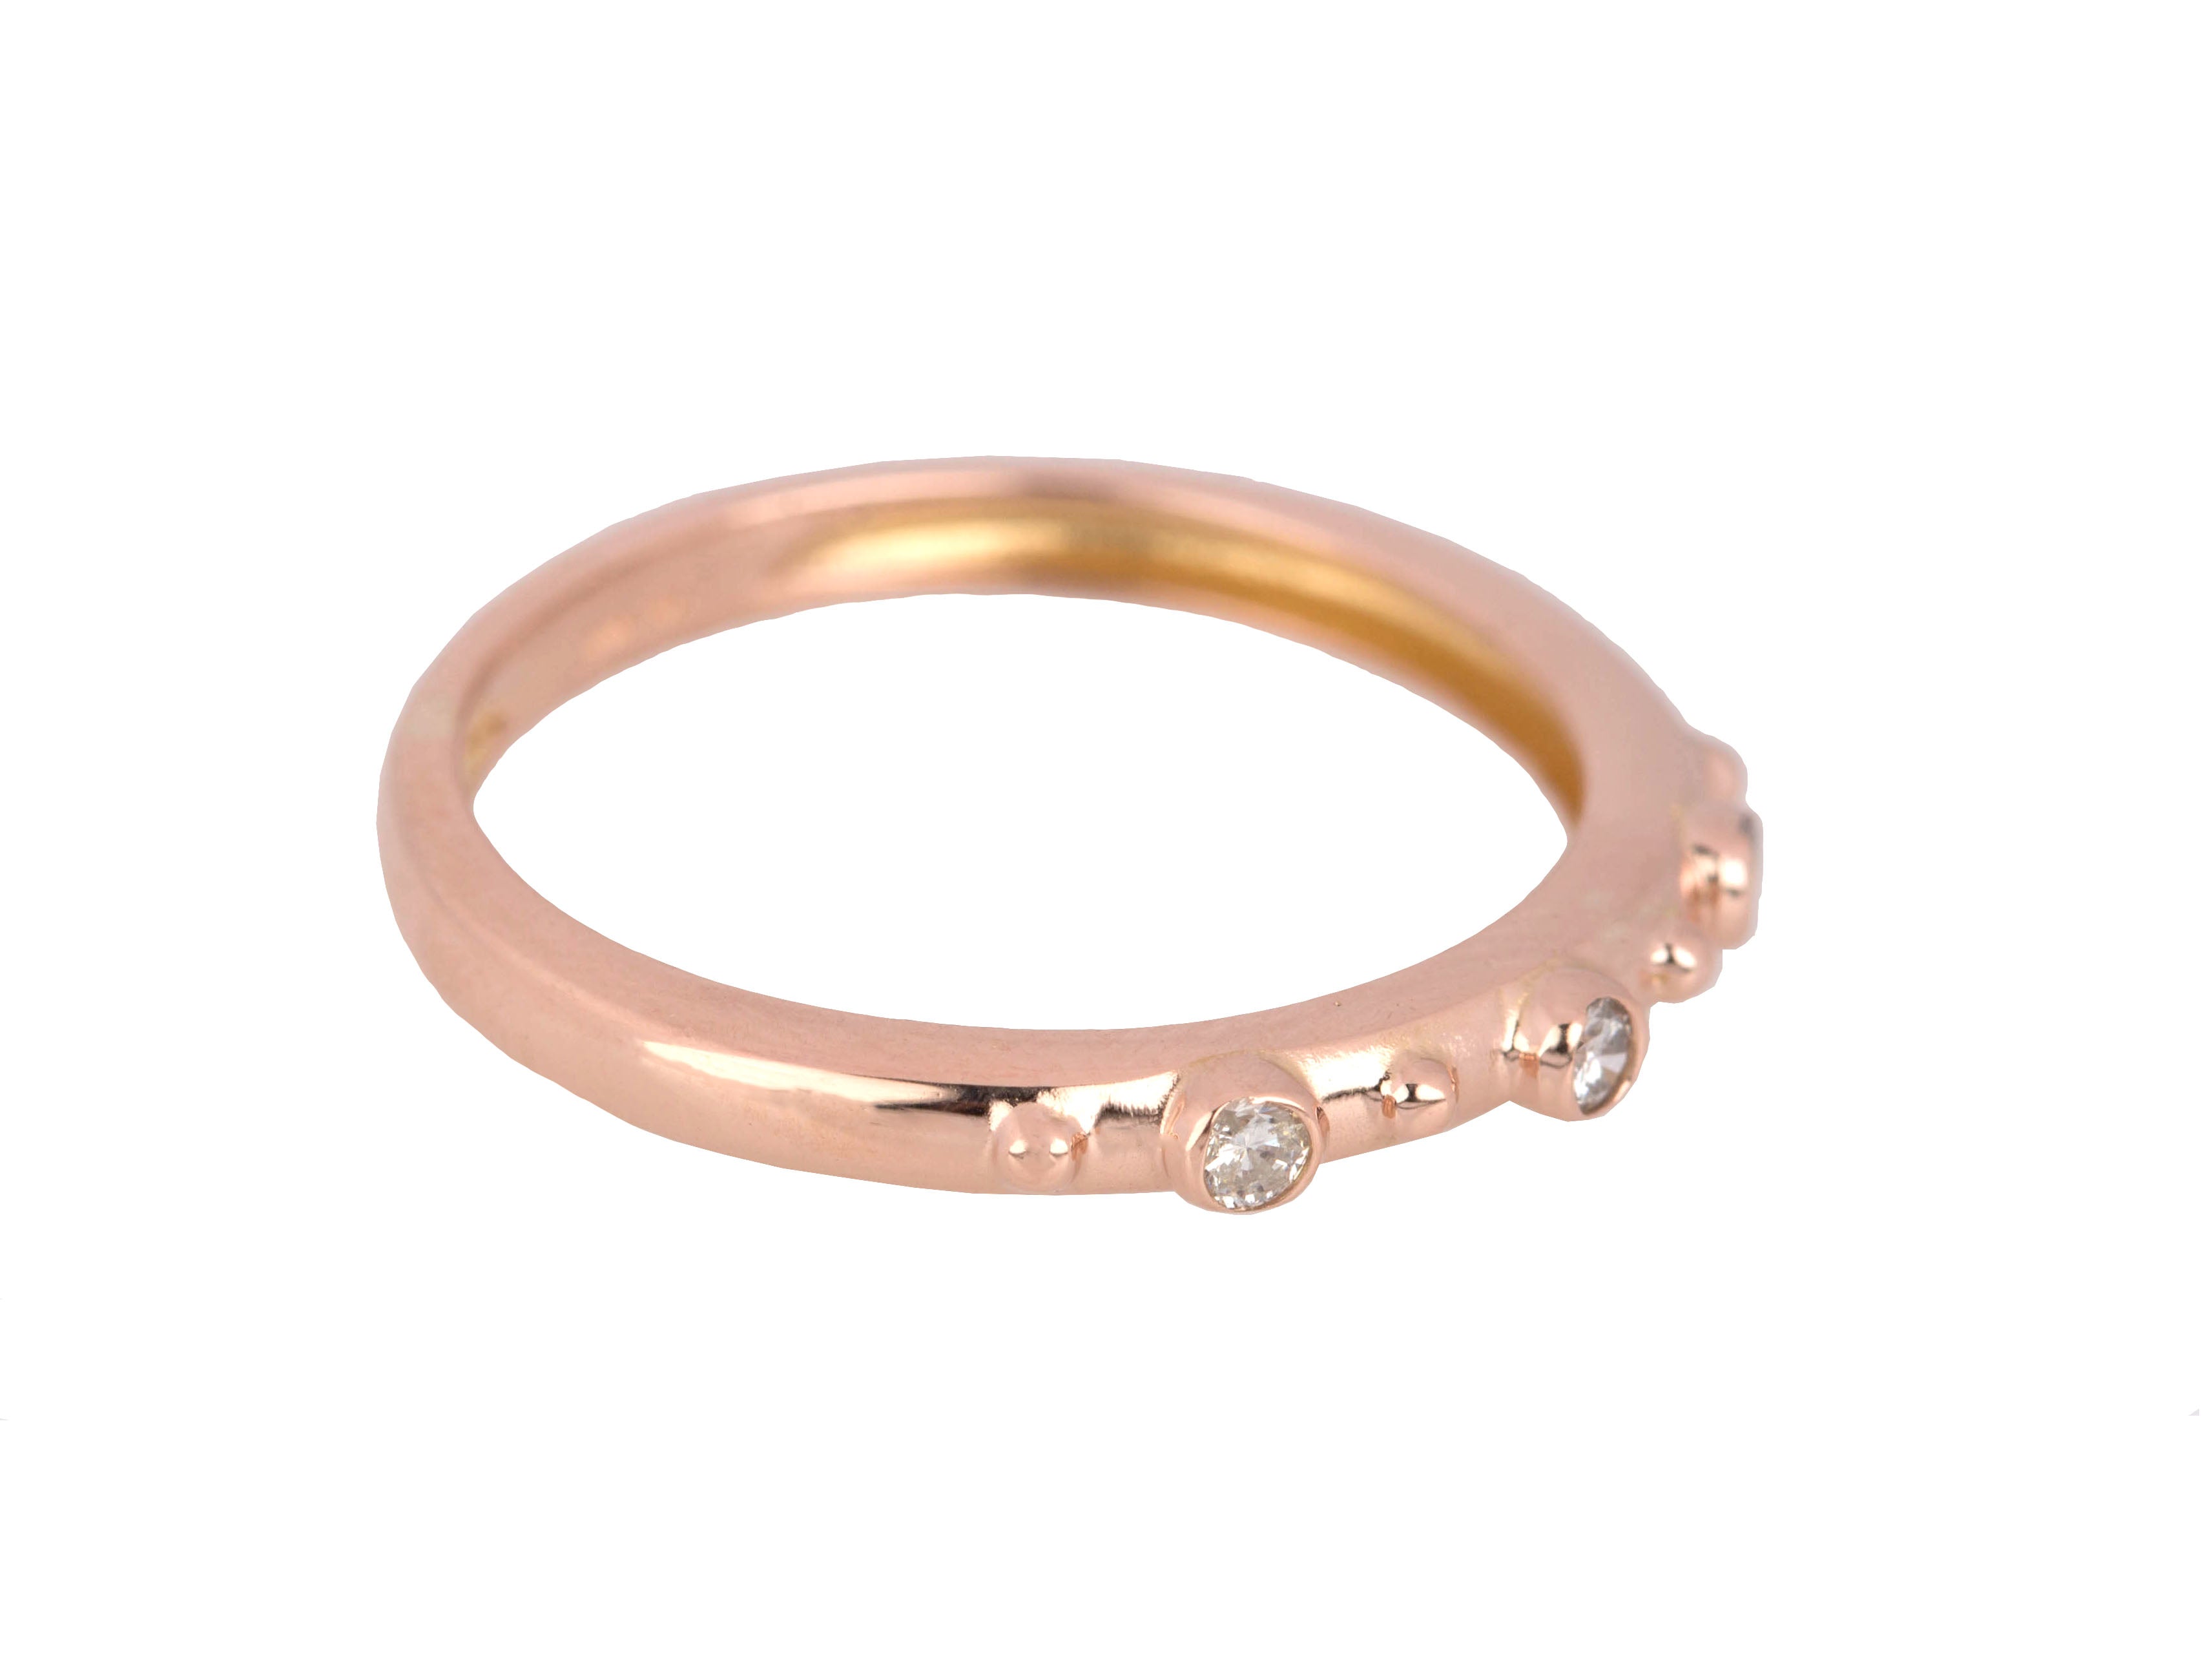 Women's 14K Rose Gold 0.09ctw Diamond 2mm 3-Stone Stackable Band Ring